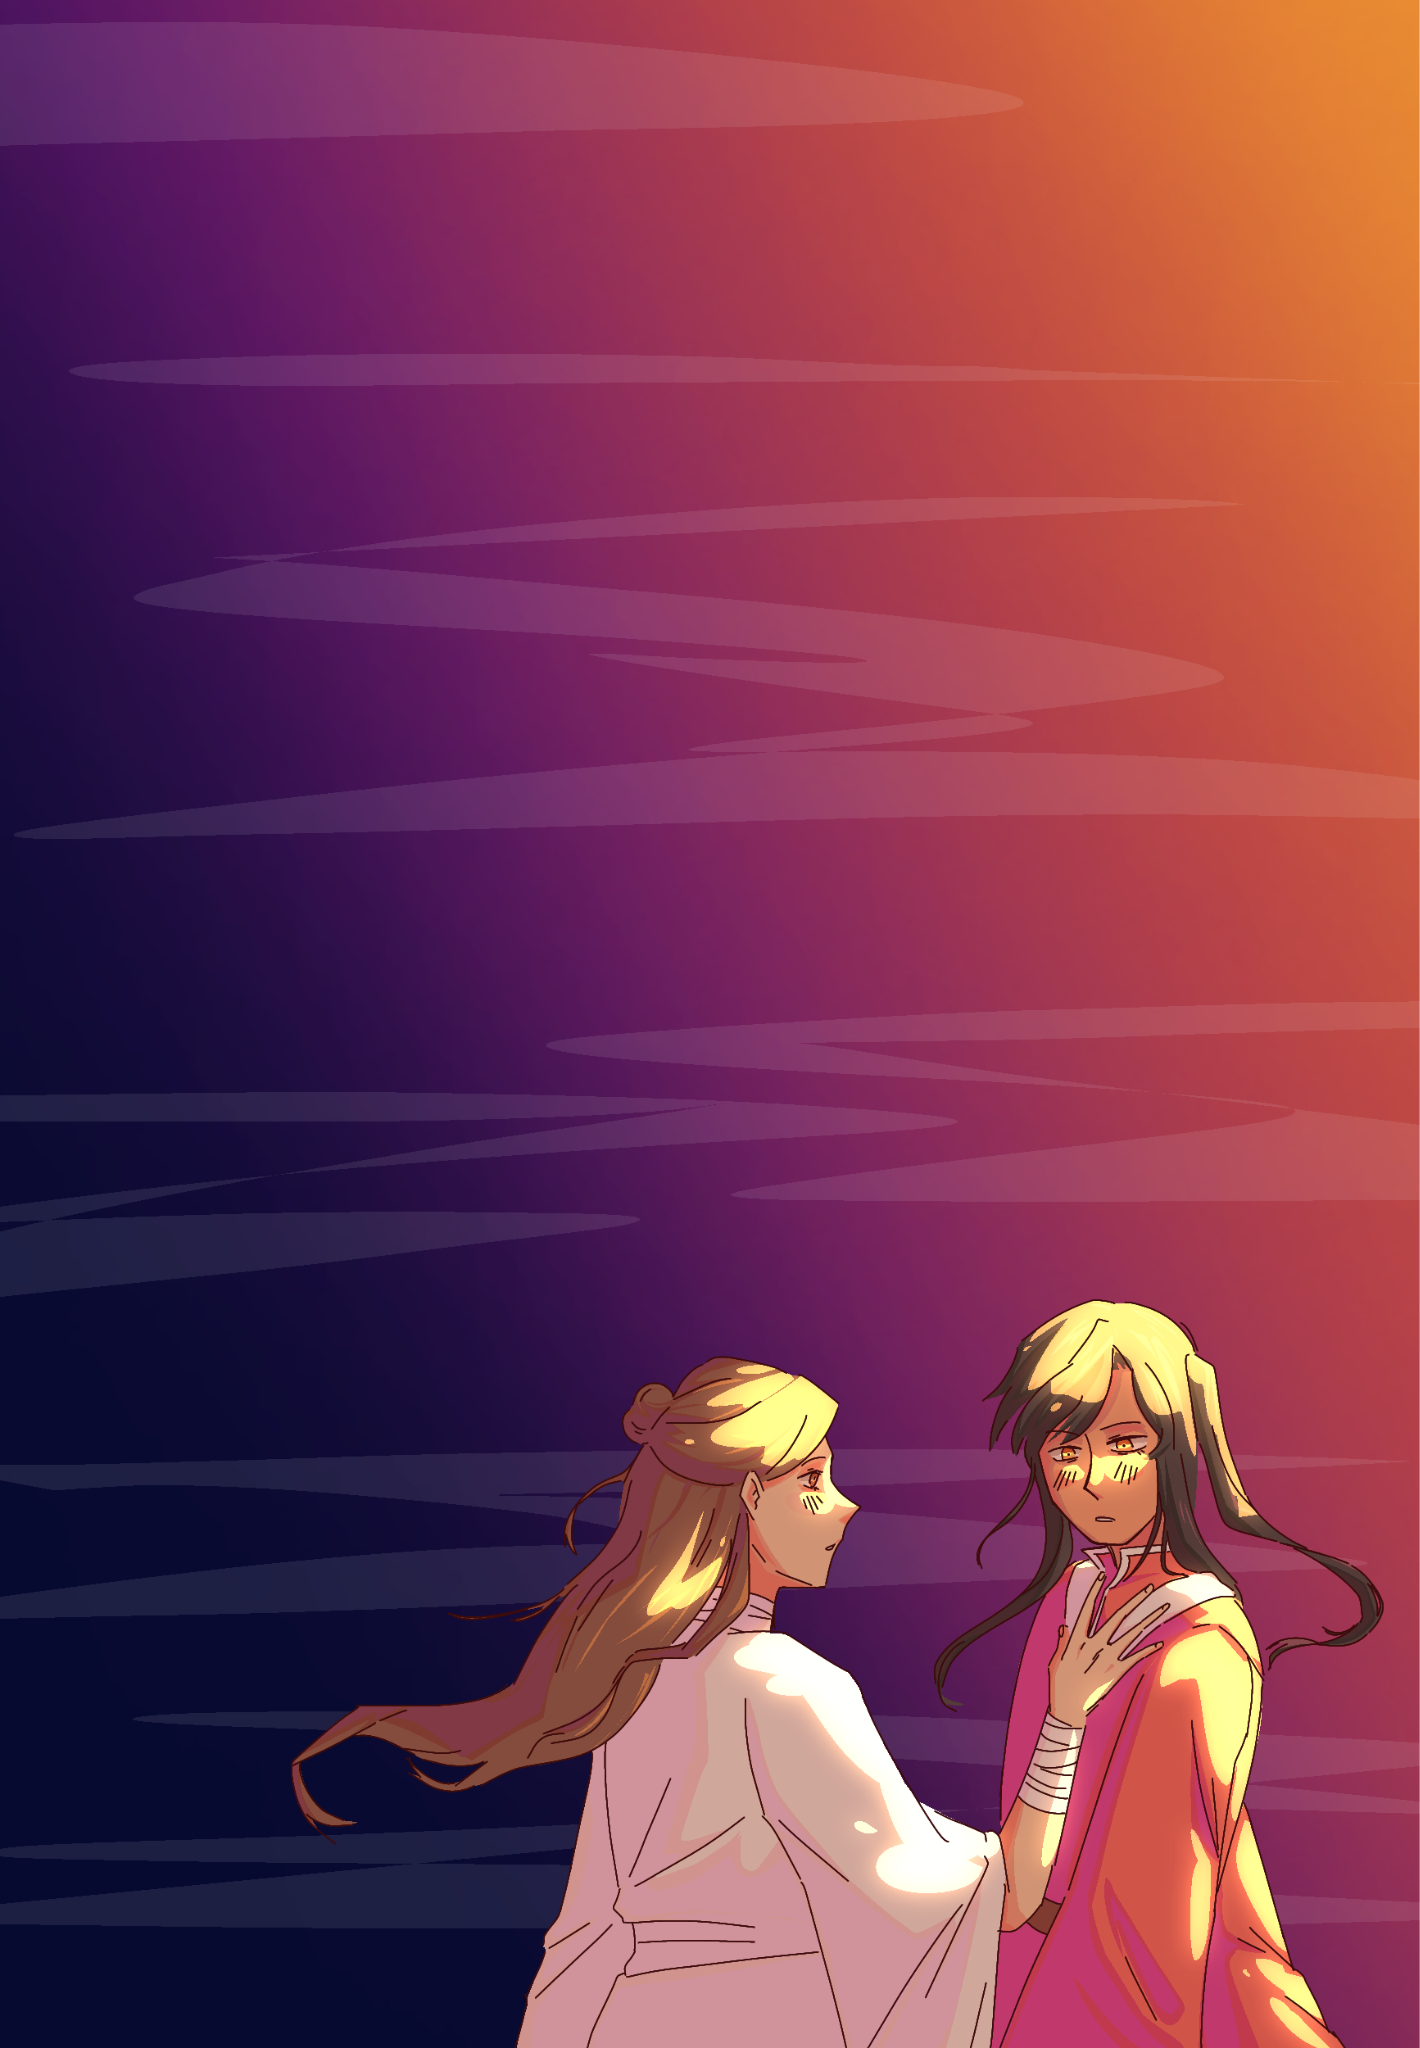 digital drawing of xie lian and hua cheng in his san lang form. they are positioned in the bottom right of the page, and the colors suggest a sunset